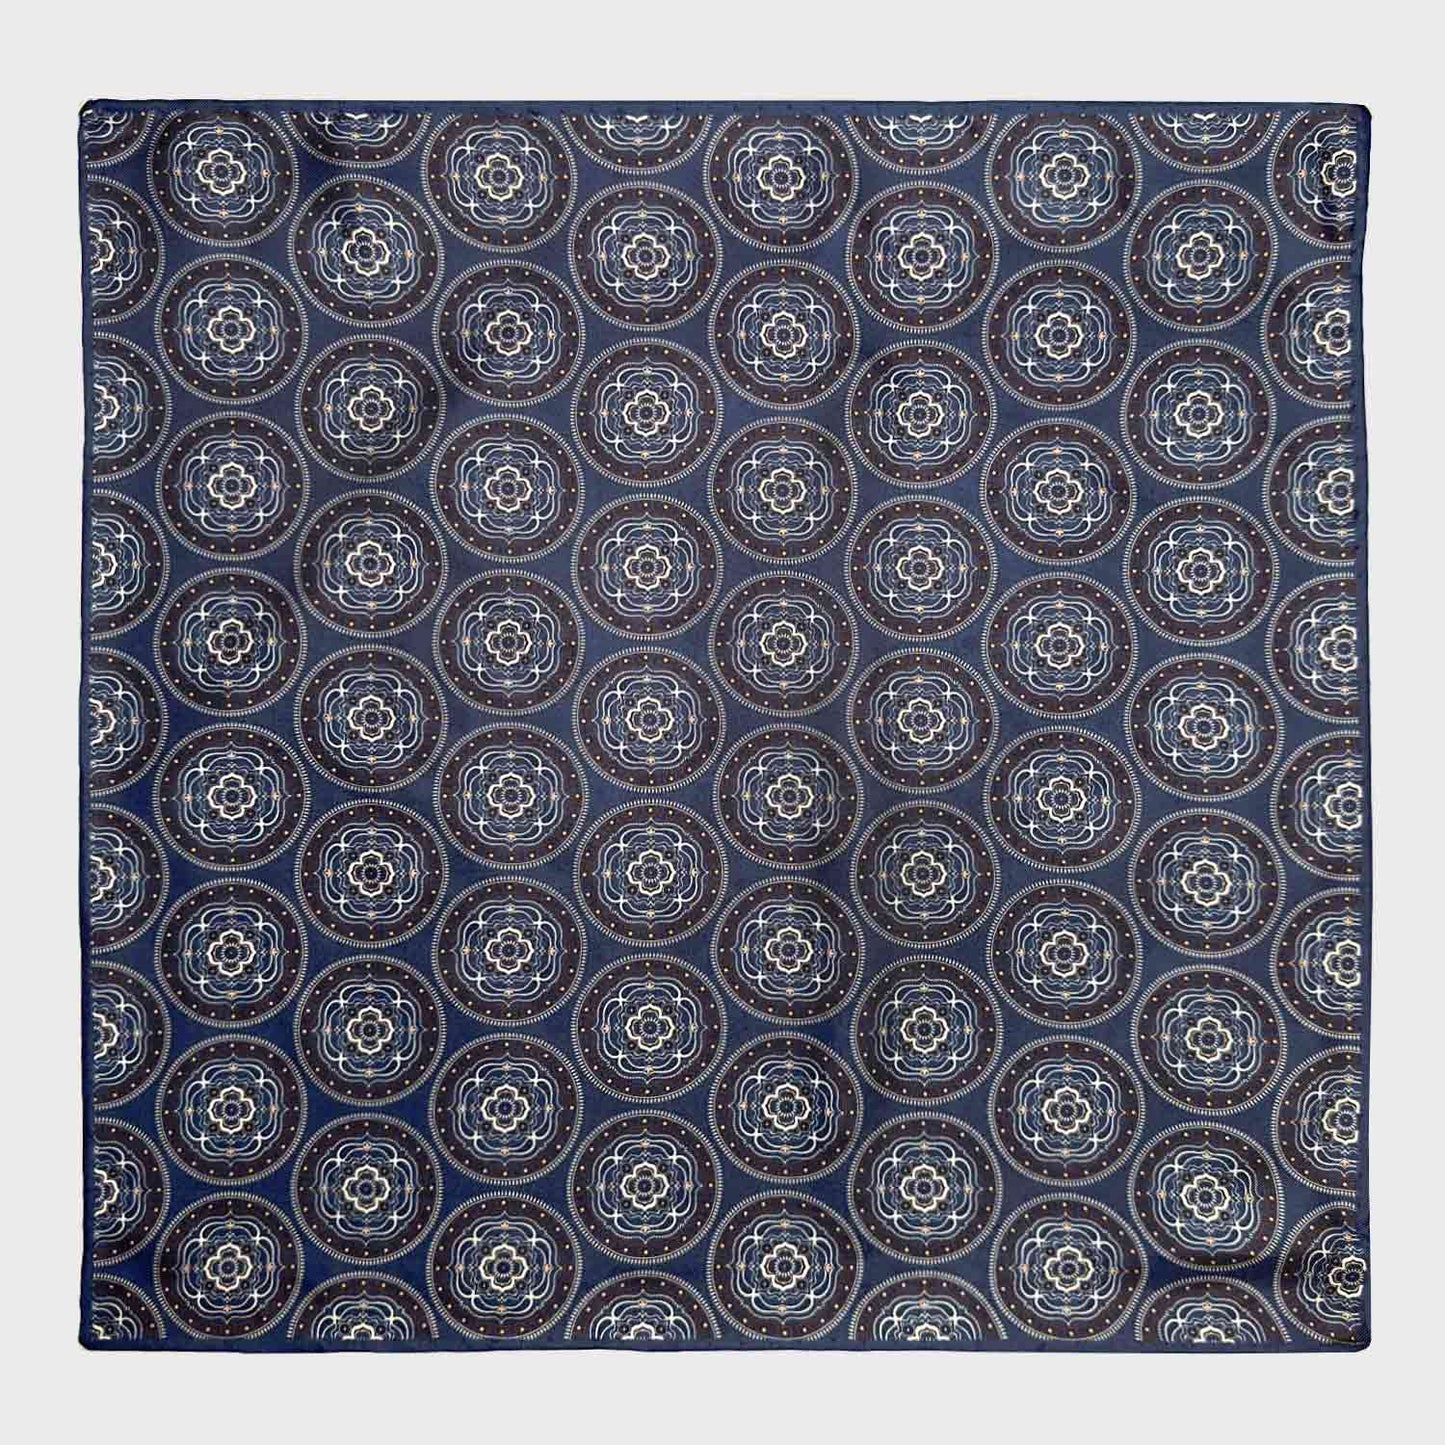 Denim Blue Silk Pocket Square Mandala Medallions. Elegant blue pochette made with soft silk and with rolled edge, denim blu background with brown and white mandala medallions pattern, ideal for a refined men's outfit